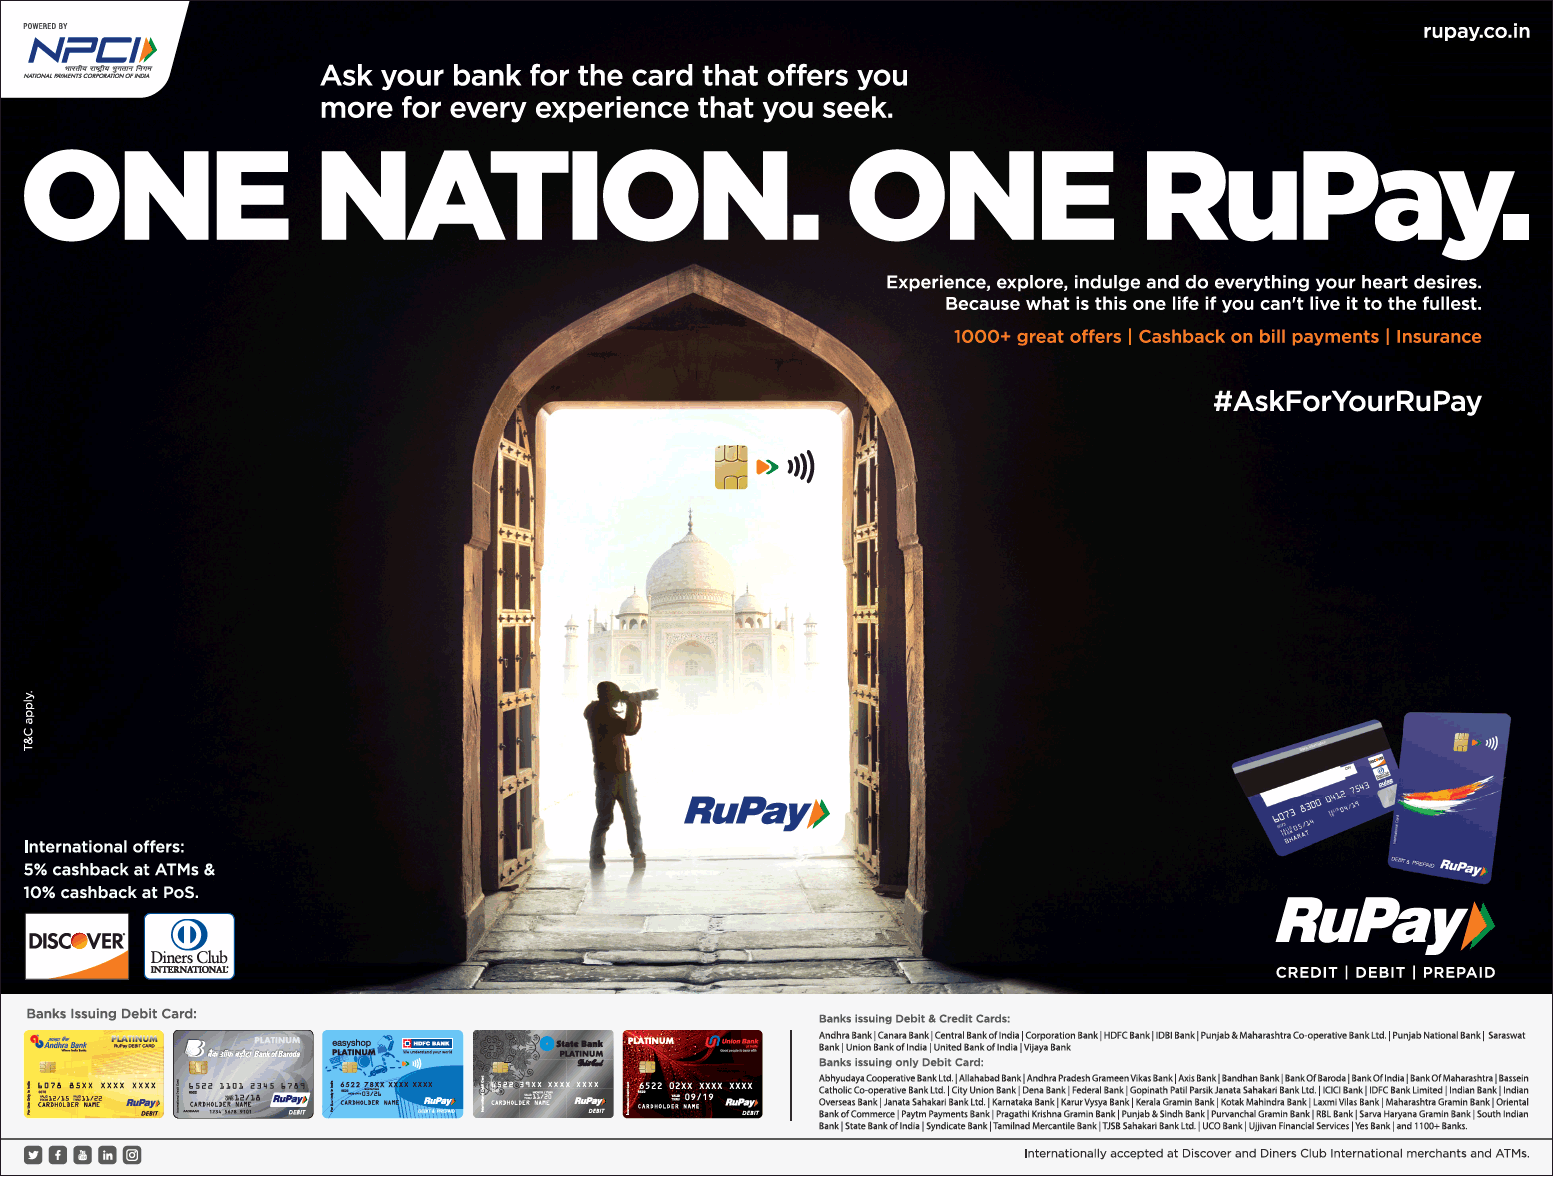 rupay-card-one-nation-one-rupay-ad-times-of-india-mumbai-19-12-2018.png